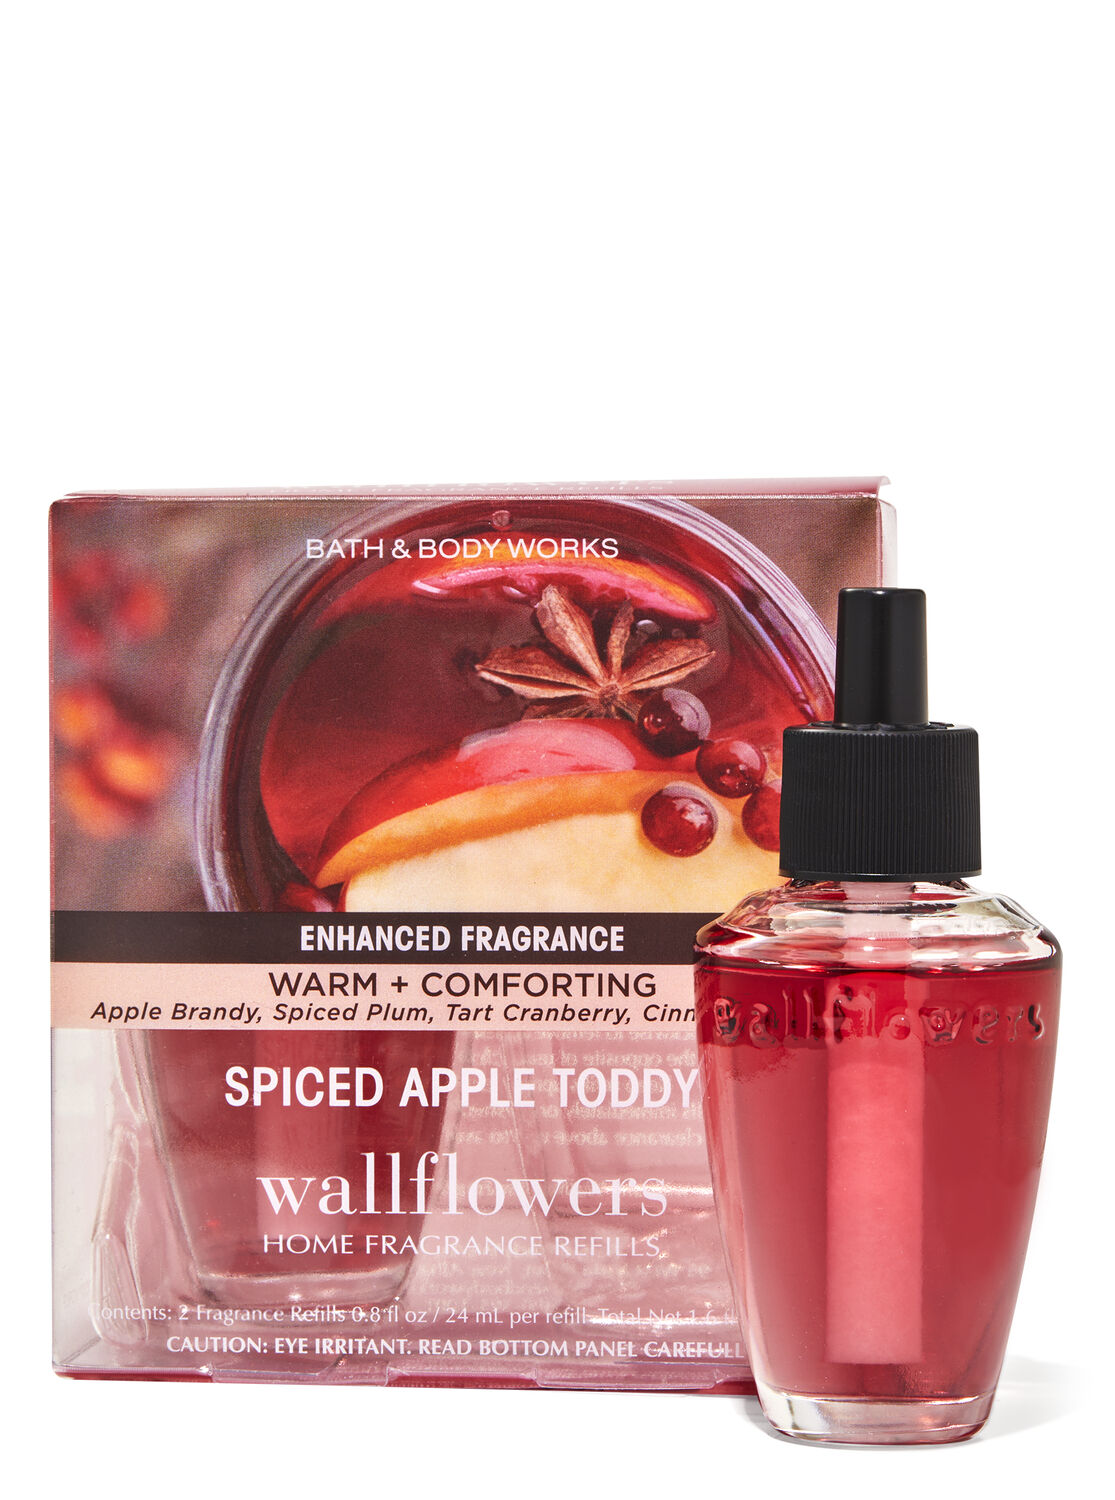 1 Bath & Body Works Spiced Apple Toddy 3 Wick Large Scented Candle 14.5 oz 